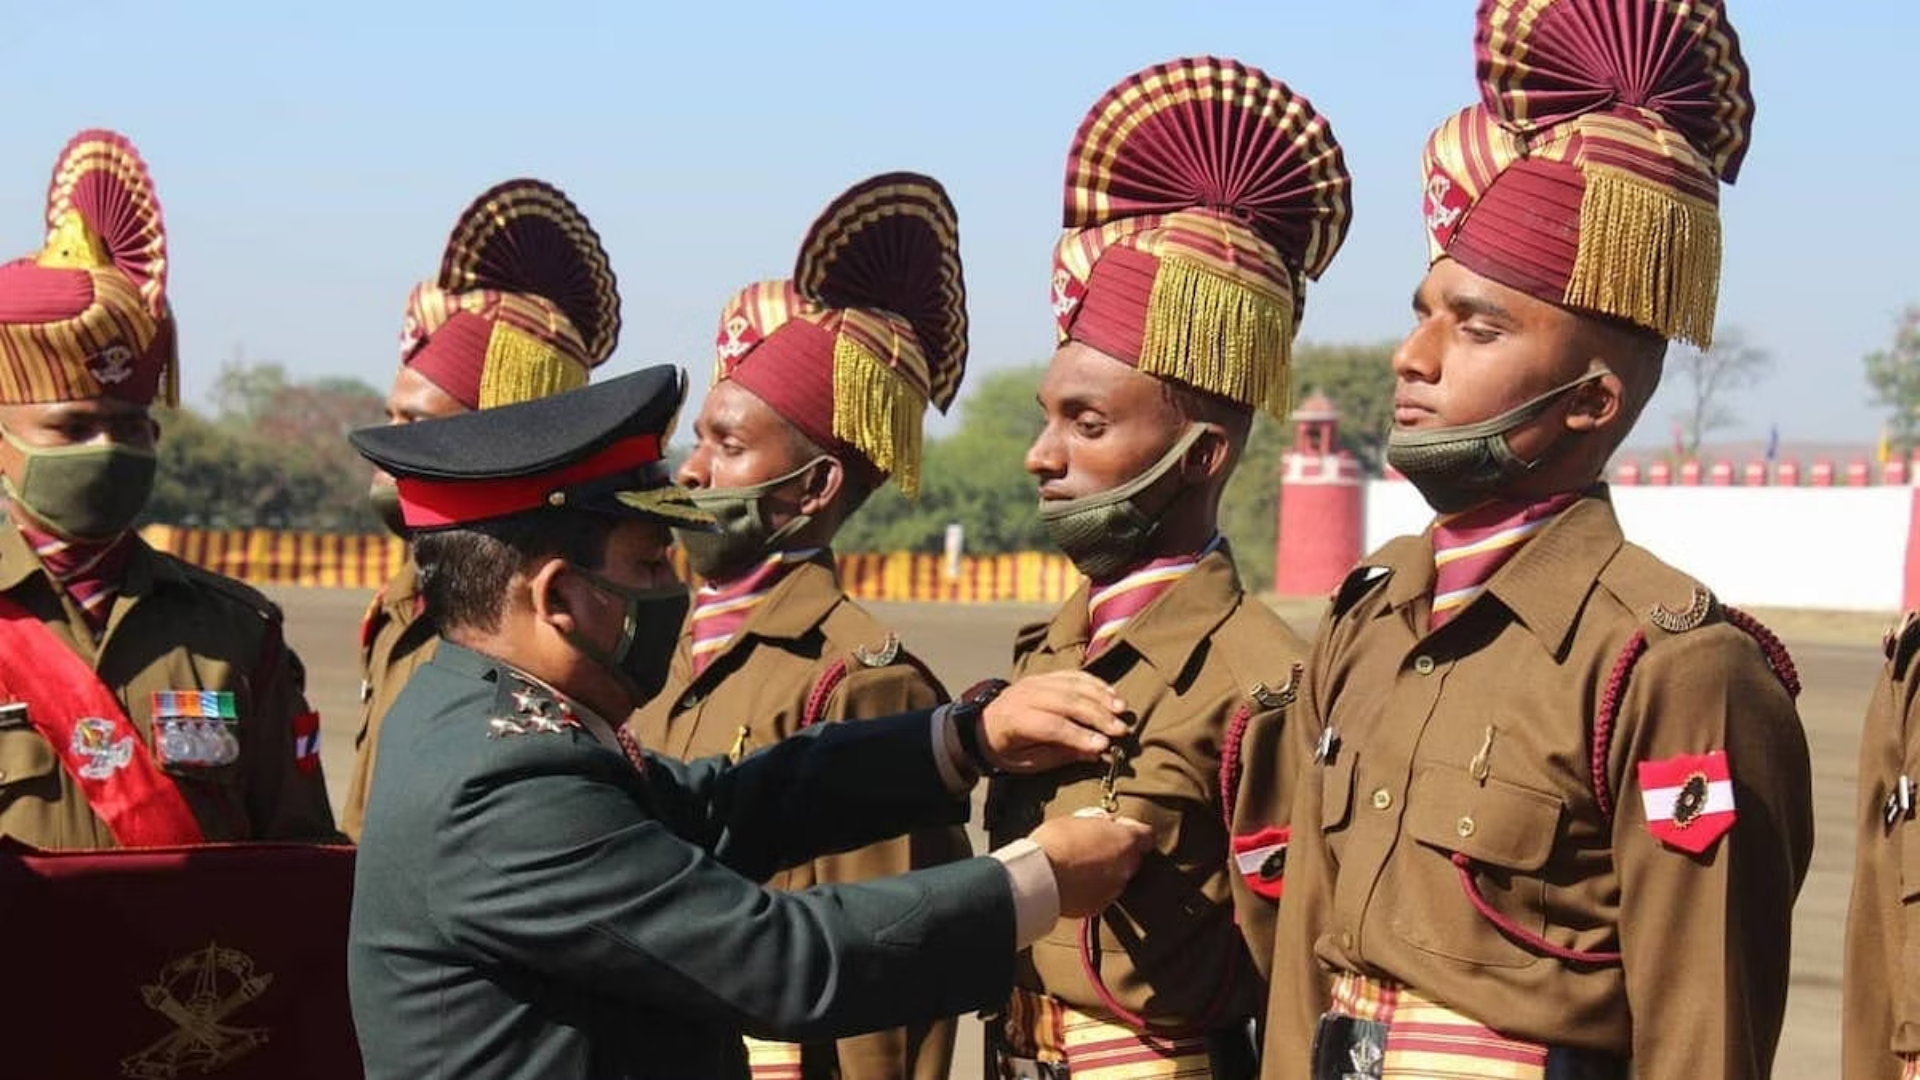 How Are PM Modi’s Agnipath Reforms Reshaping India’s Military?